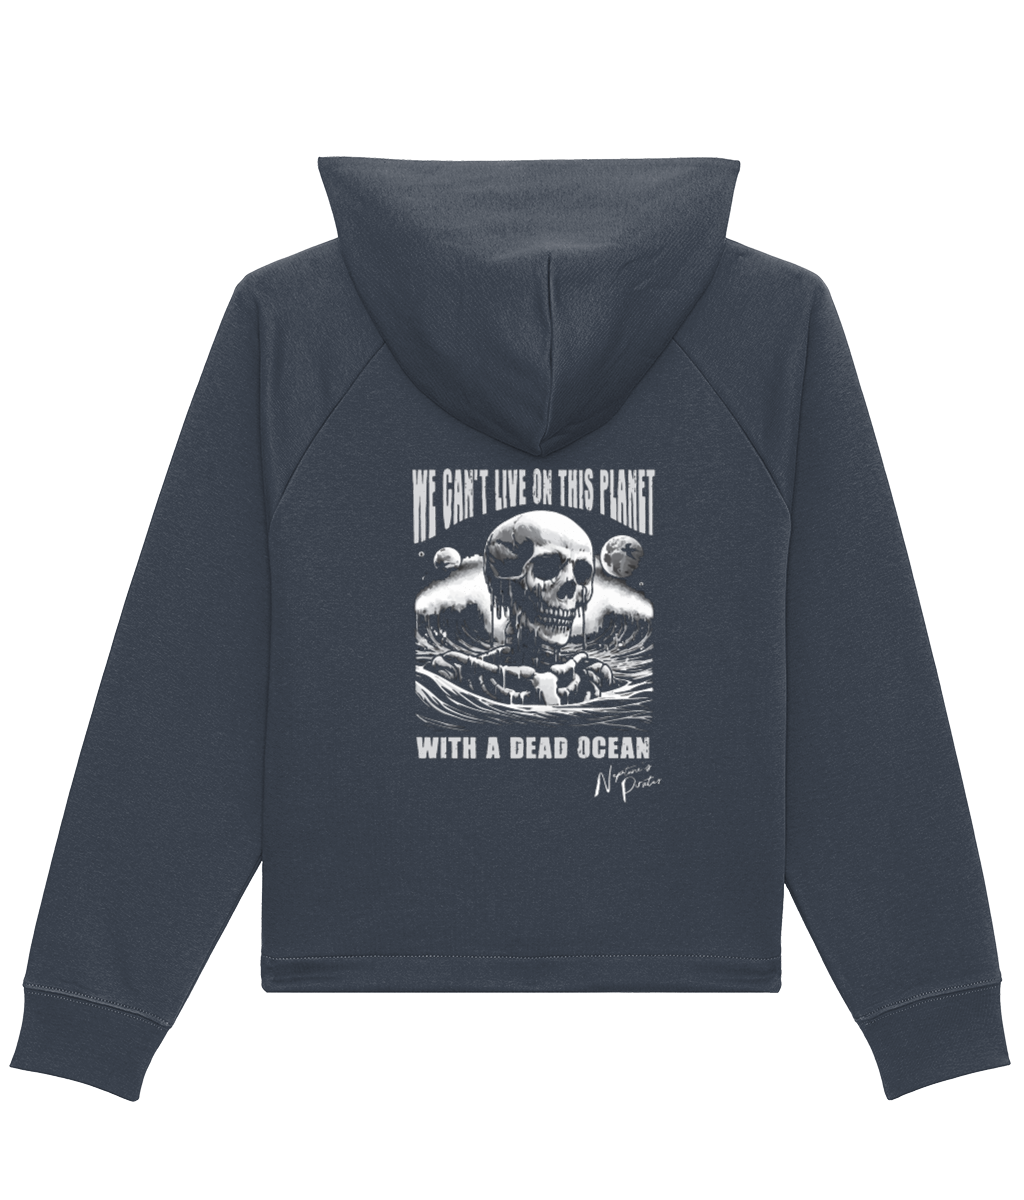 'We can't live on this planet with a dead ocean' Women's Boxy Cropped Hoodie